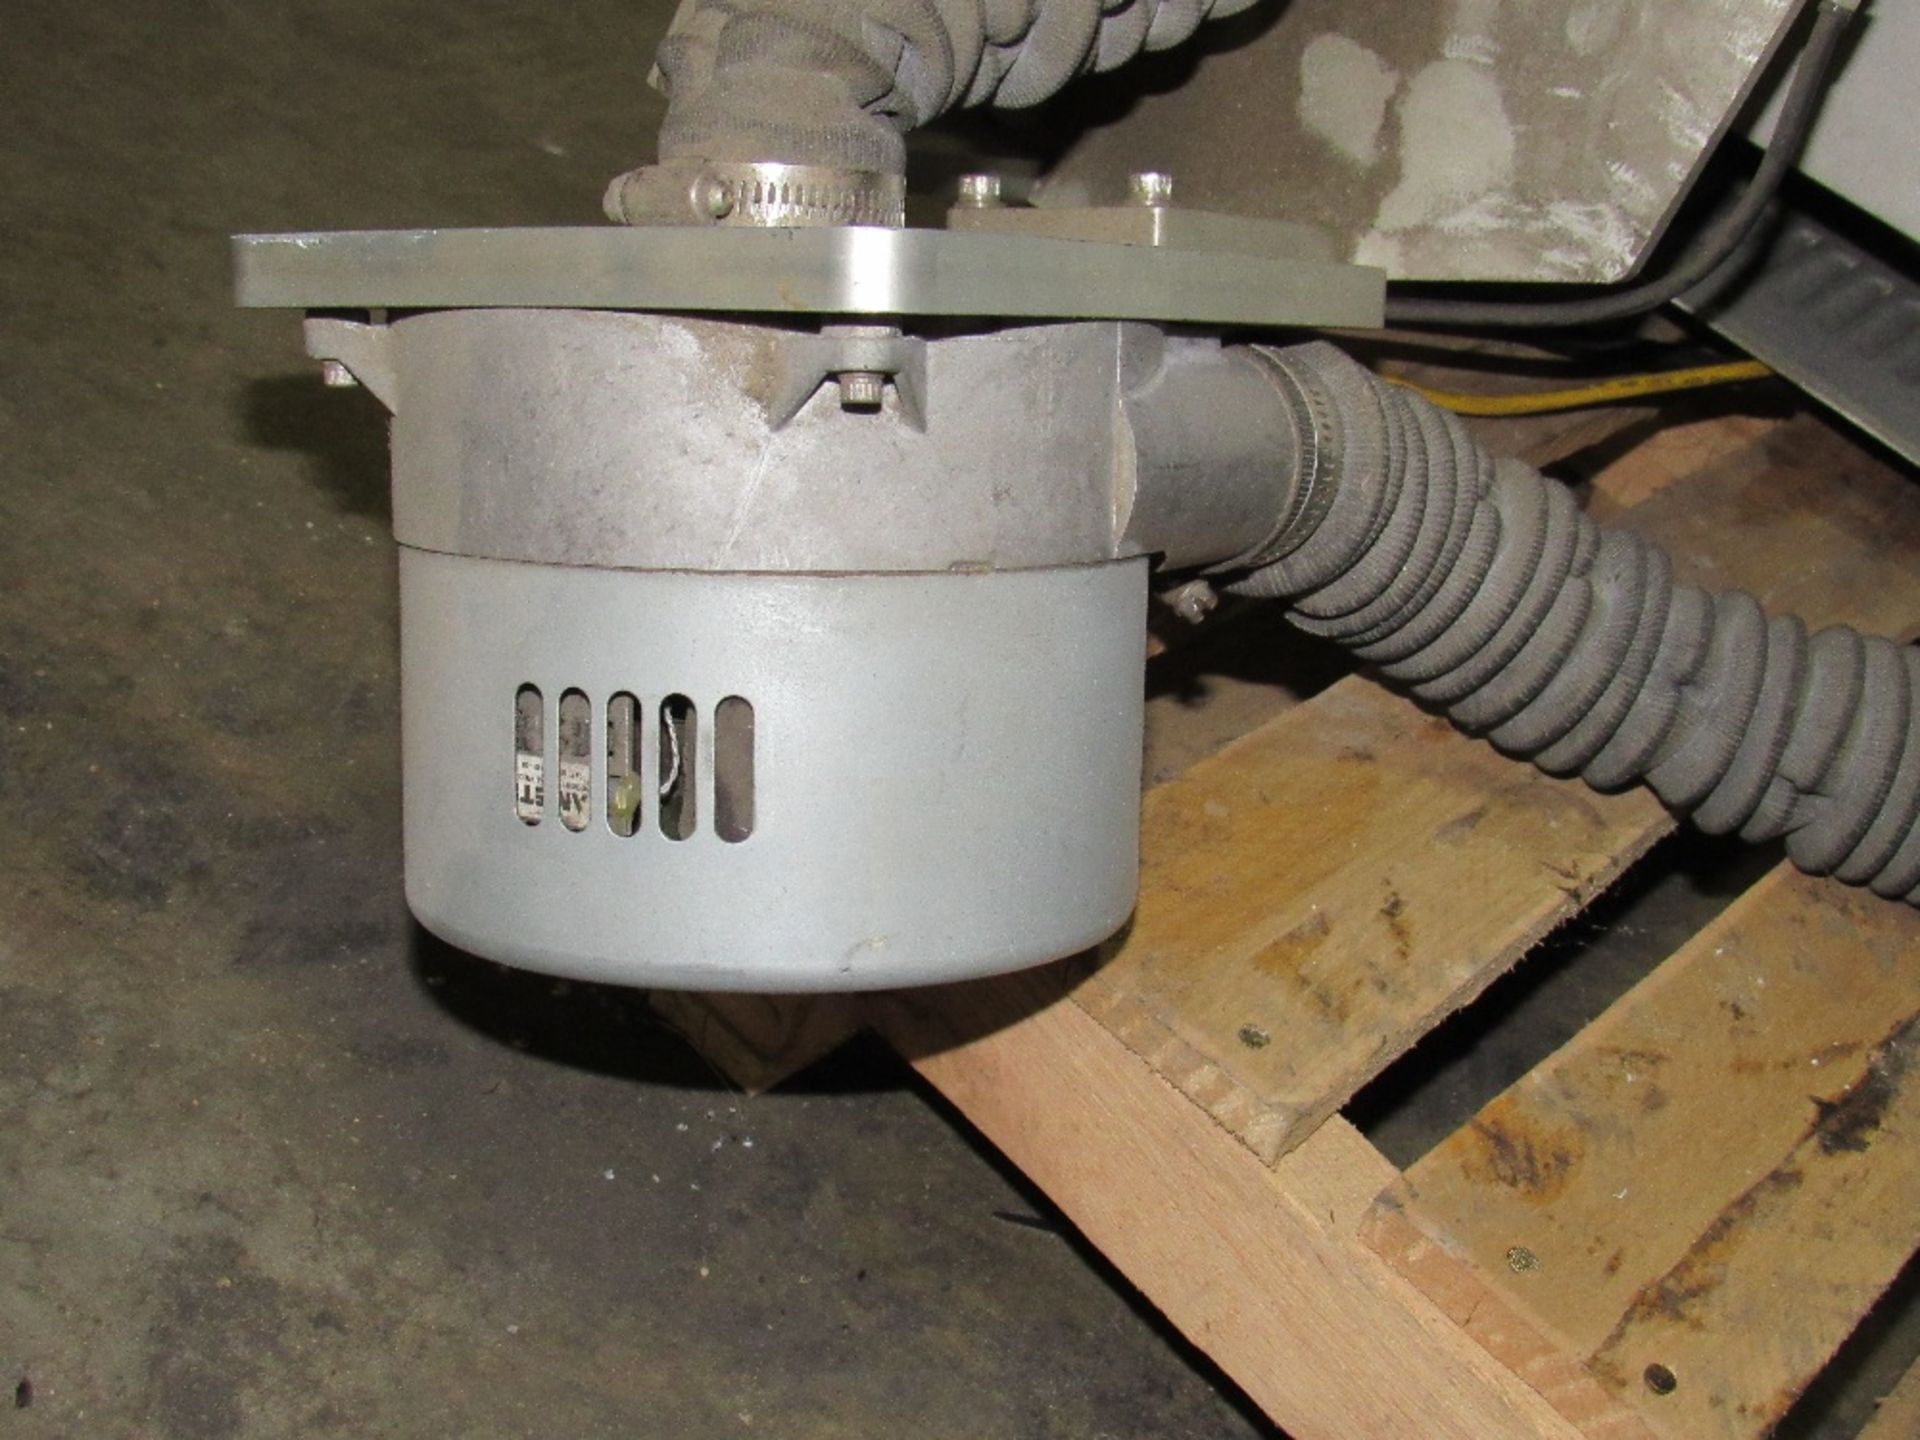 LSI Label Applicator with build in vacuum pump Model 96T0 Serial No. 1023162 designed to apply pre- - Image 9 of 10